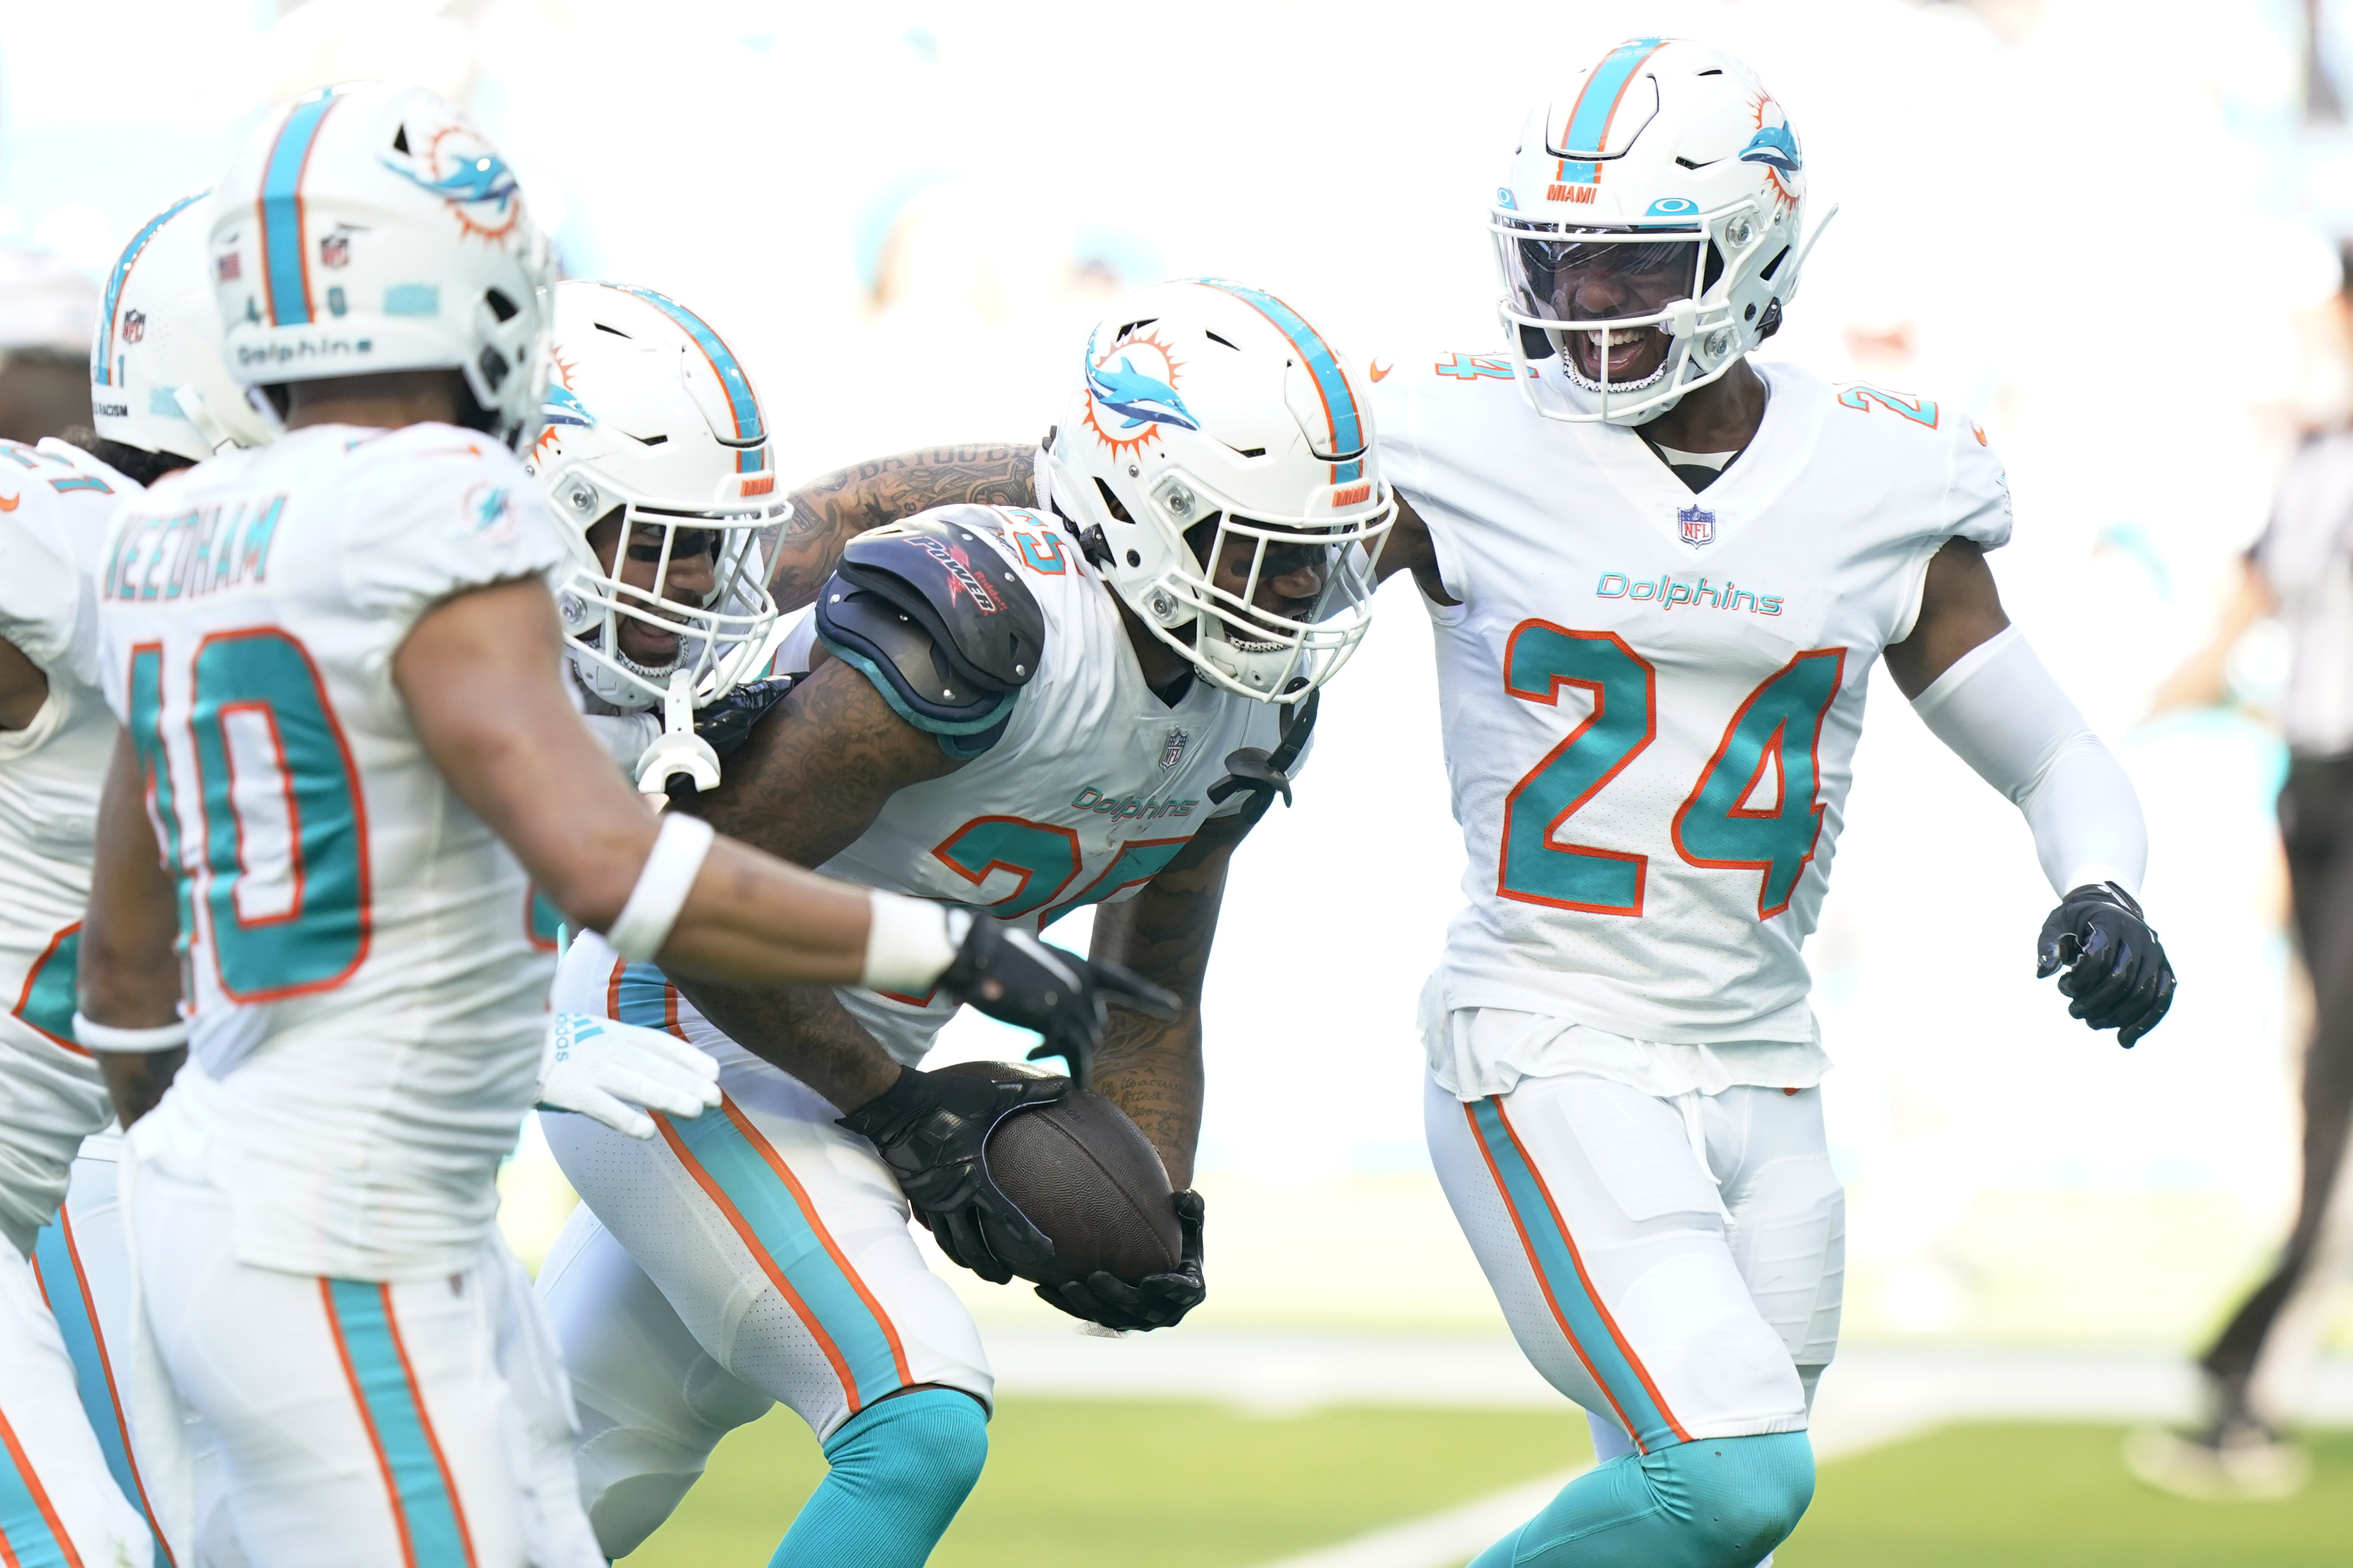 The Sporting News on X: Yes, the Dolphins' color rush uniforms